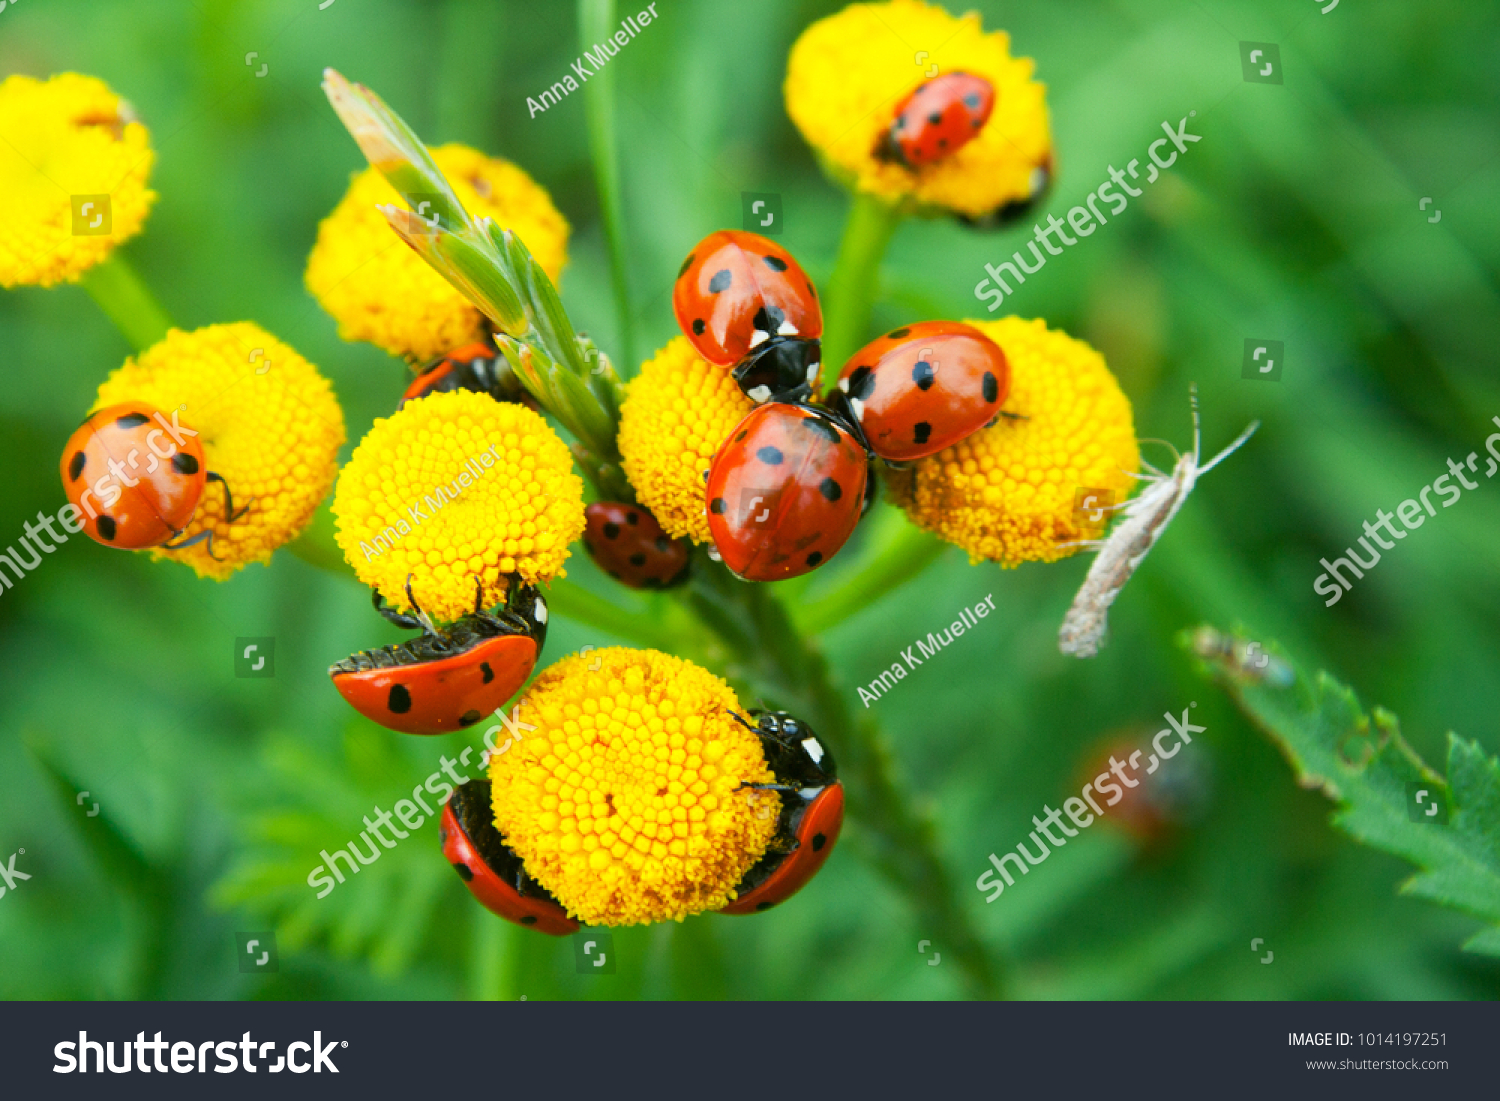 large group of ladybugs resting on yellow flowers with green background #1014197251